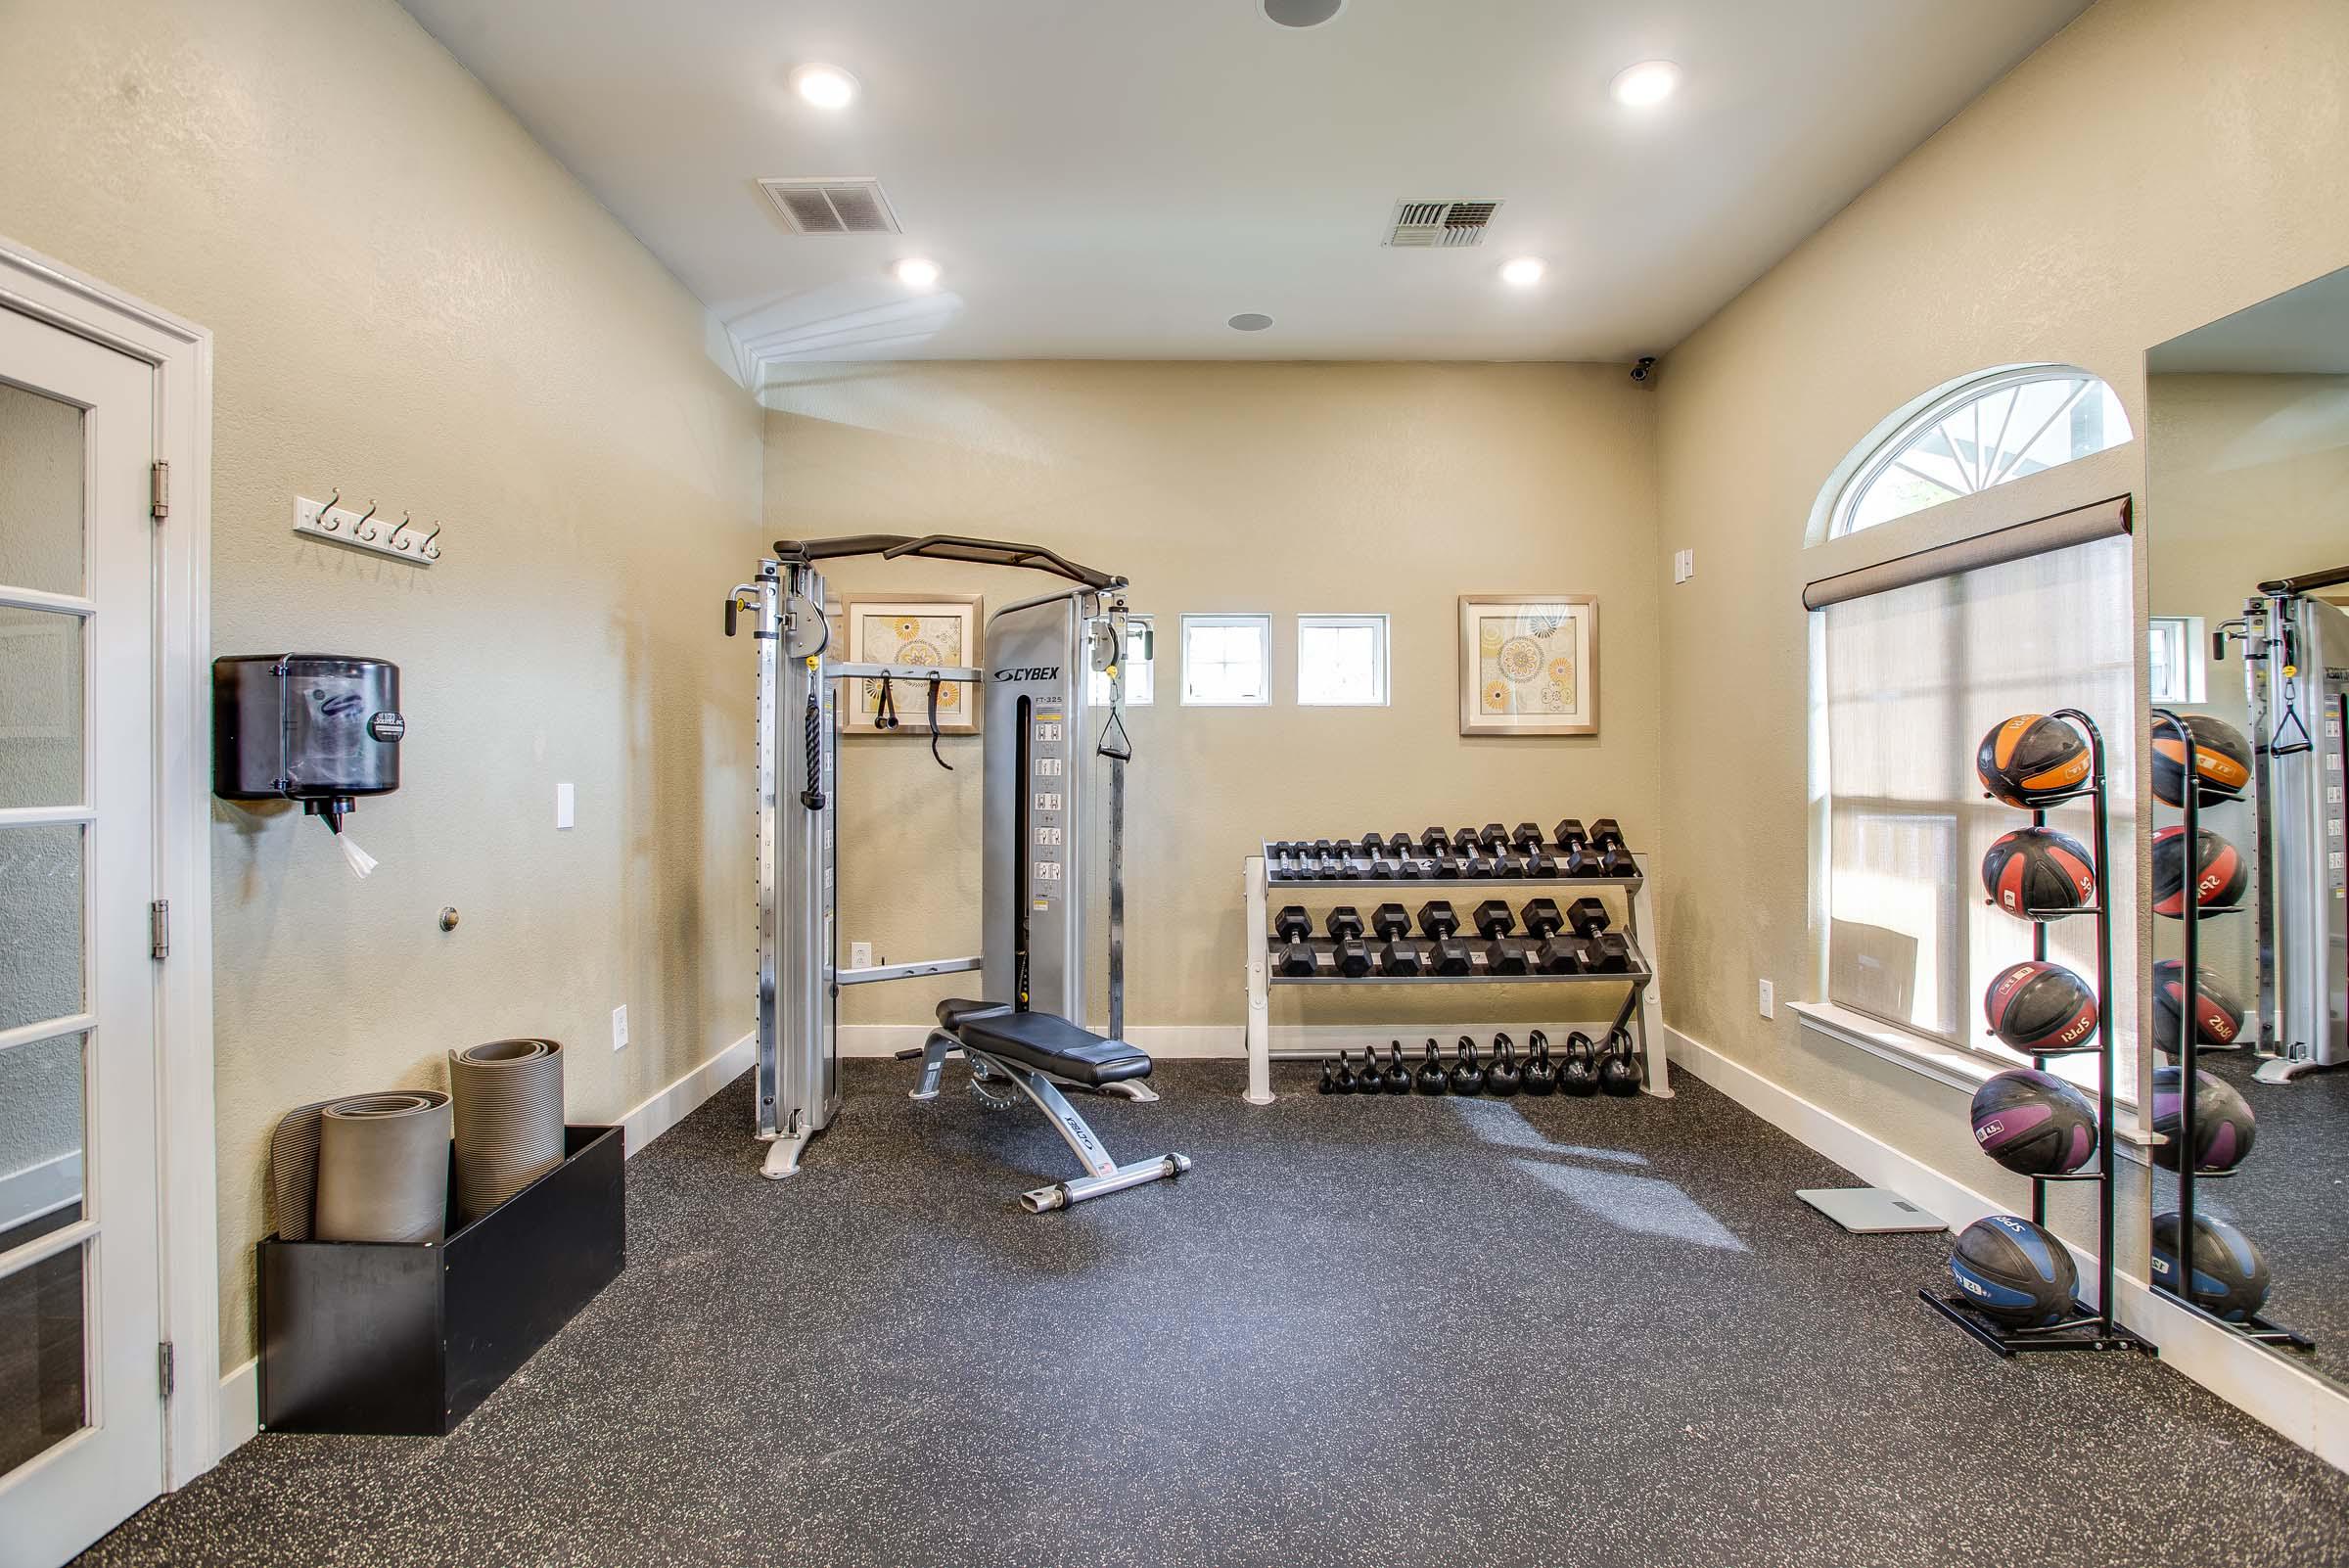 24 hour fitness center with free weights at Camden Ashburn Farm in Ashburn, Virginia.